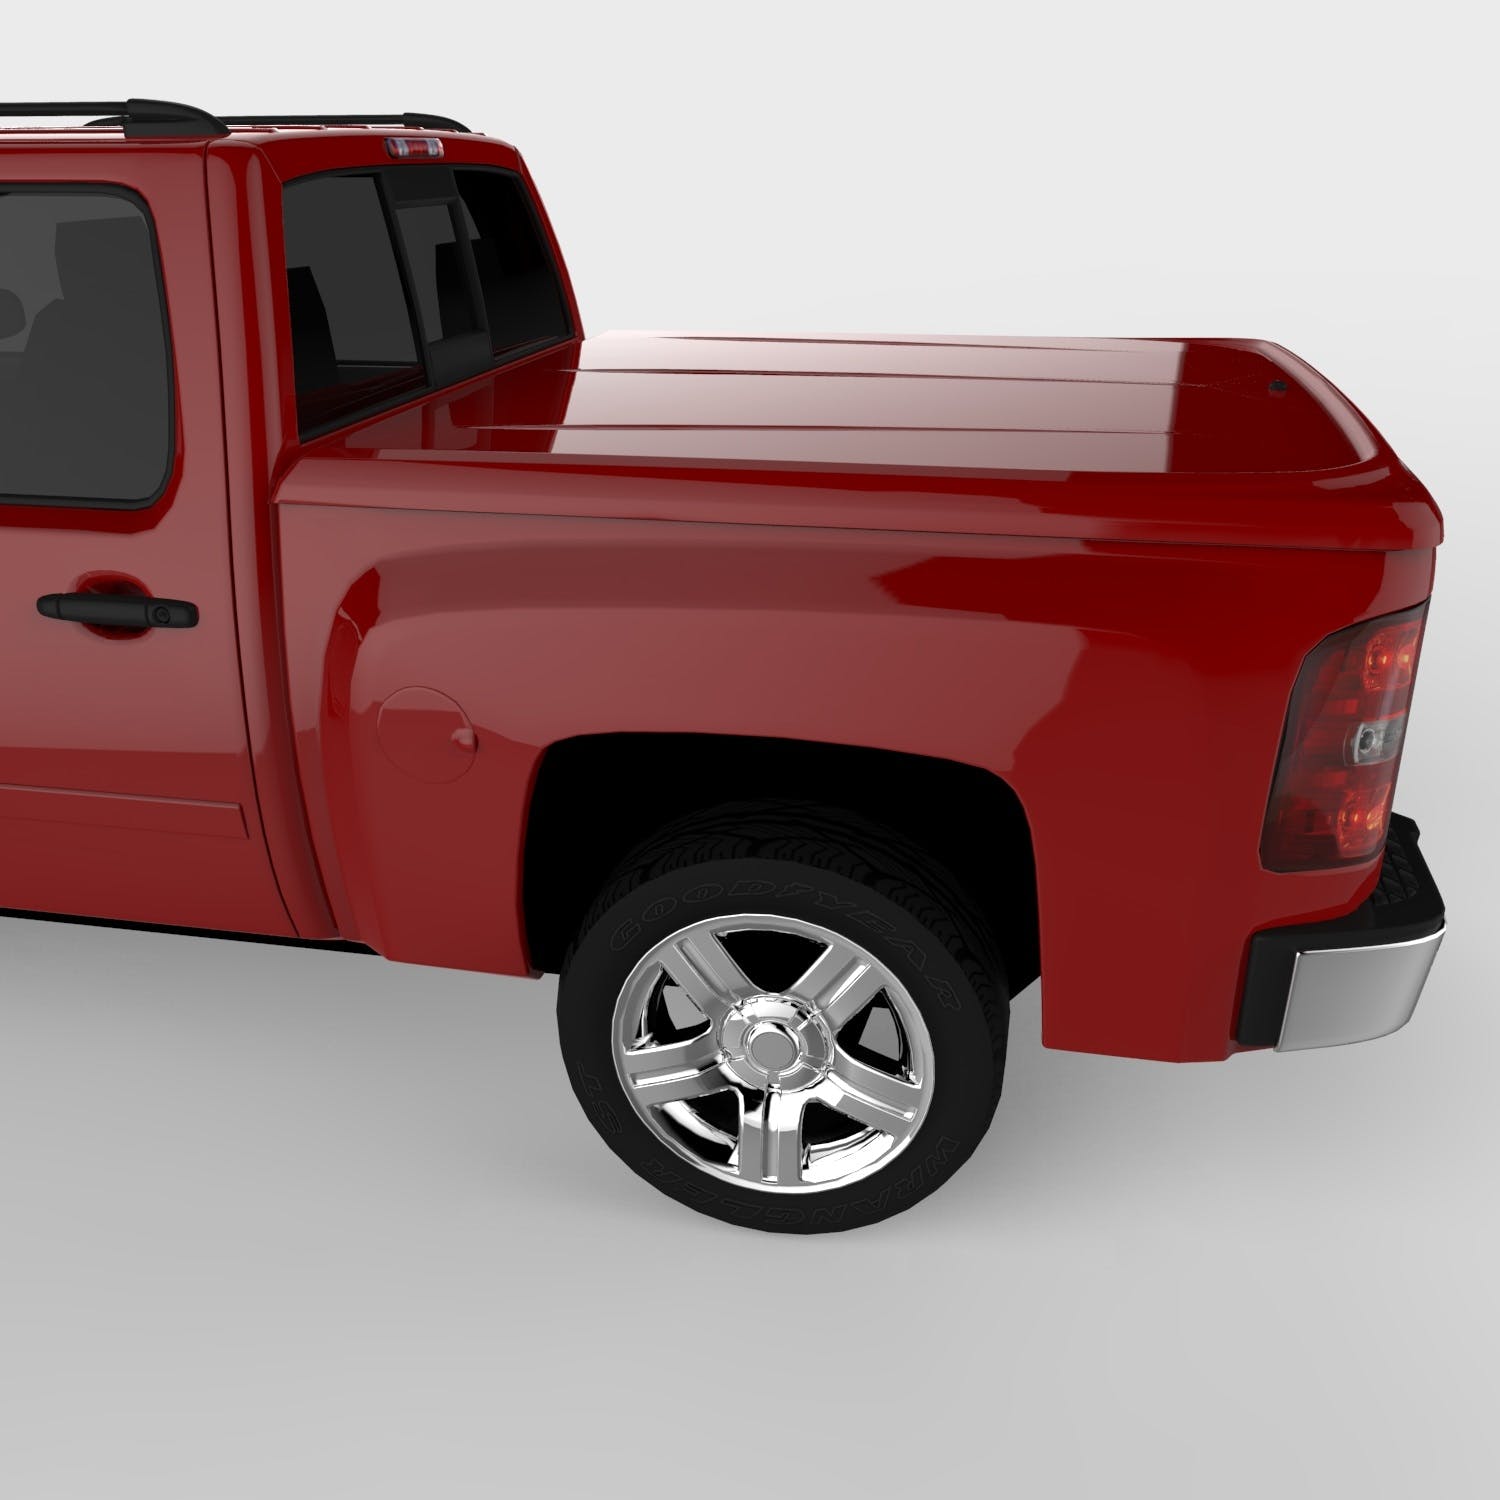 UnderCover UC1066L-74 LUX Tonneau Cover, Victory Red